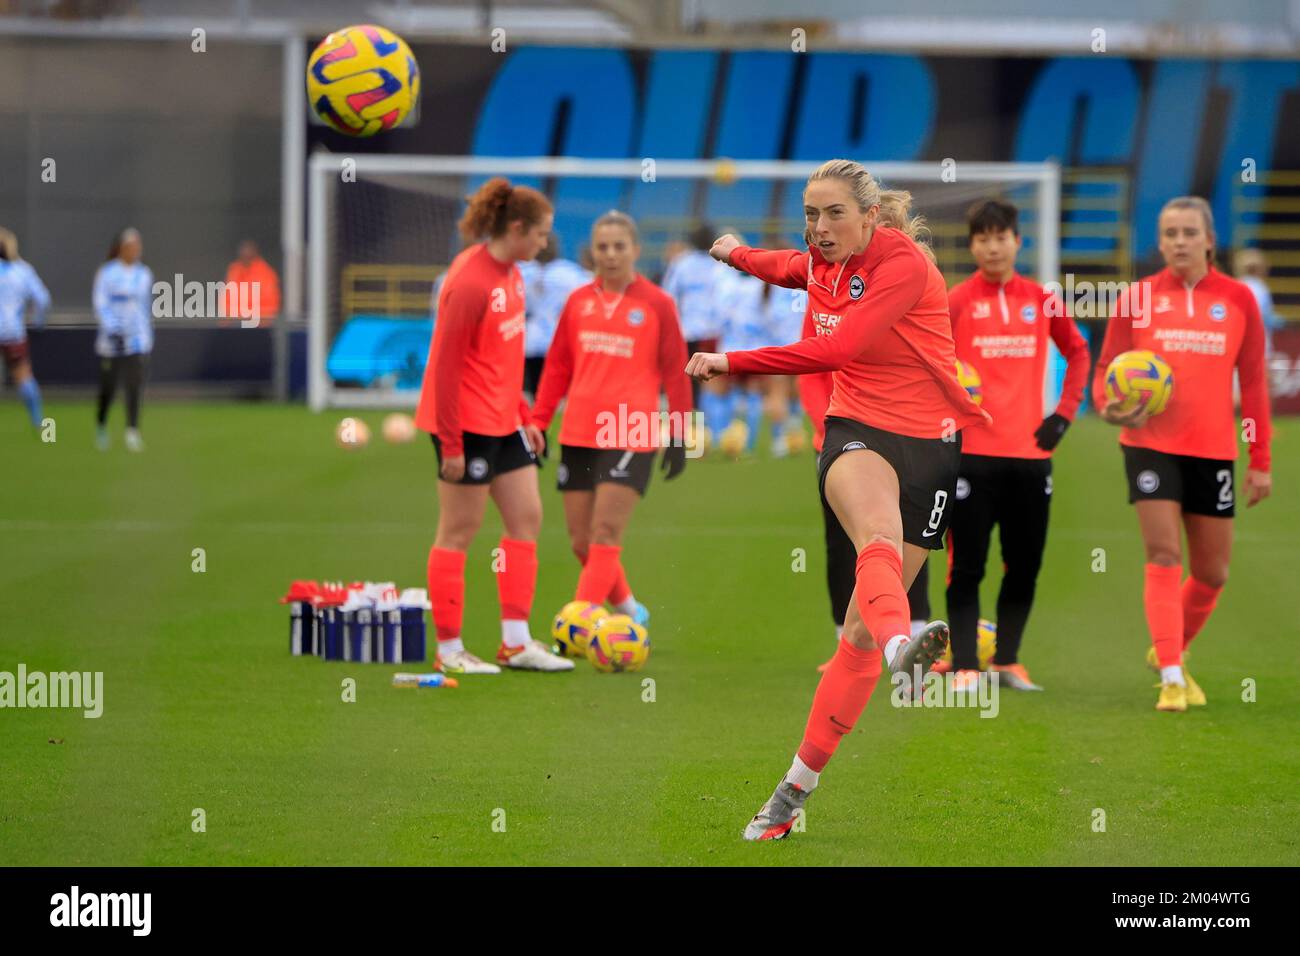 Megan Connolly #8 of Brighton during the warm up ahead of  the The FA Women's Super League match Manchester City Women vs Brighton & Hove Albion W.F.C. at Etihad Campus, Manchester, United Kingdom, 4th December 2022  (Photo by Conor Molloy/News Images) Stock Photo